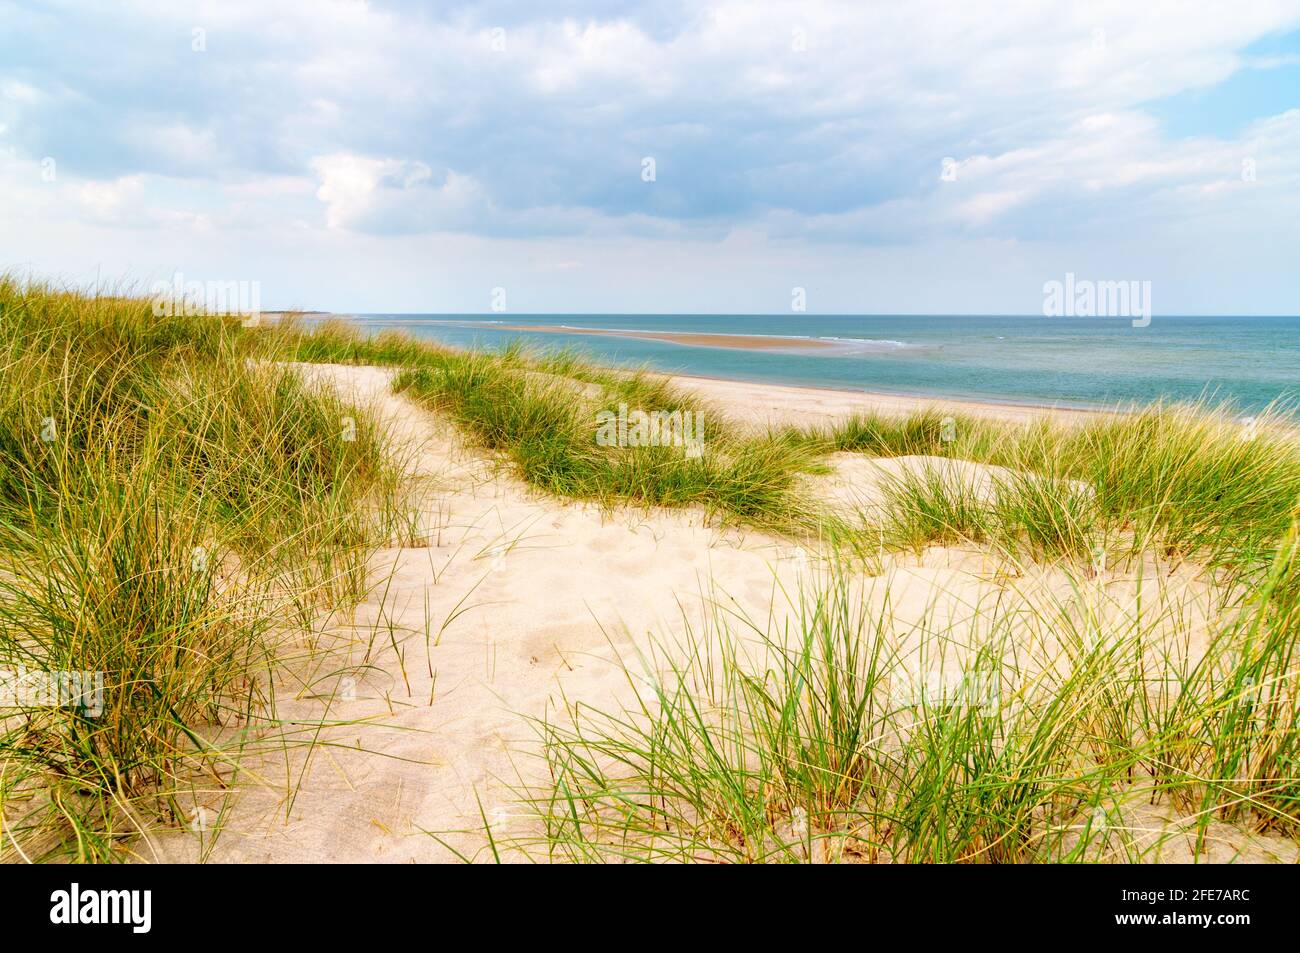 A sand bank appearing along a sandy beach with marram grass growing on the edge of the beach, at Burnham Overy Staith, Norfolk, UK. Stock Photo